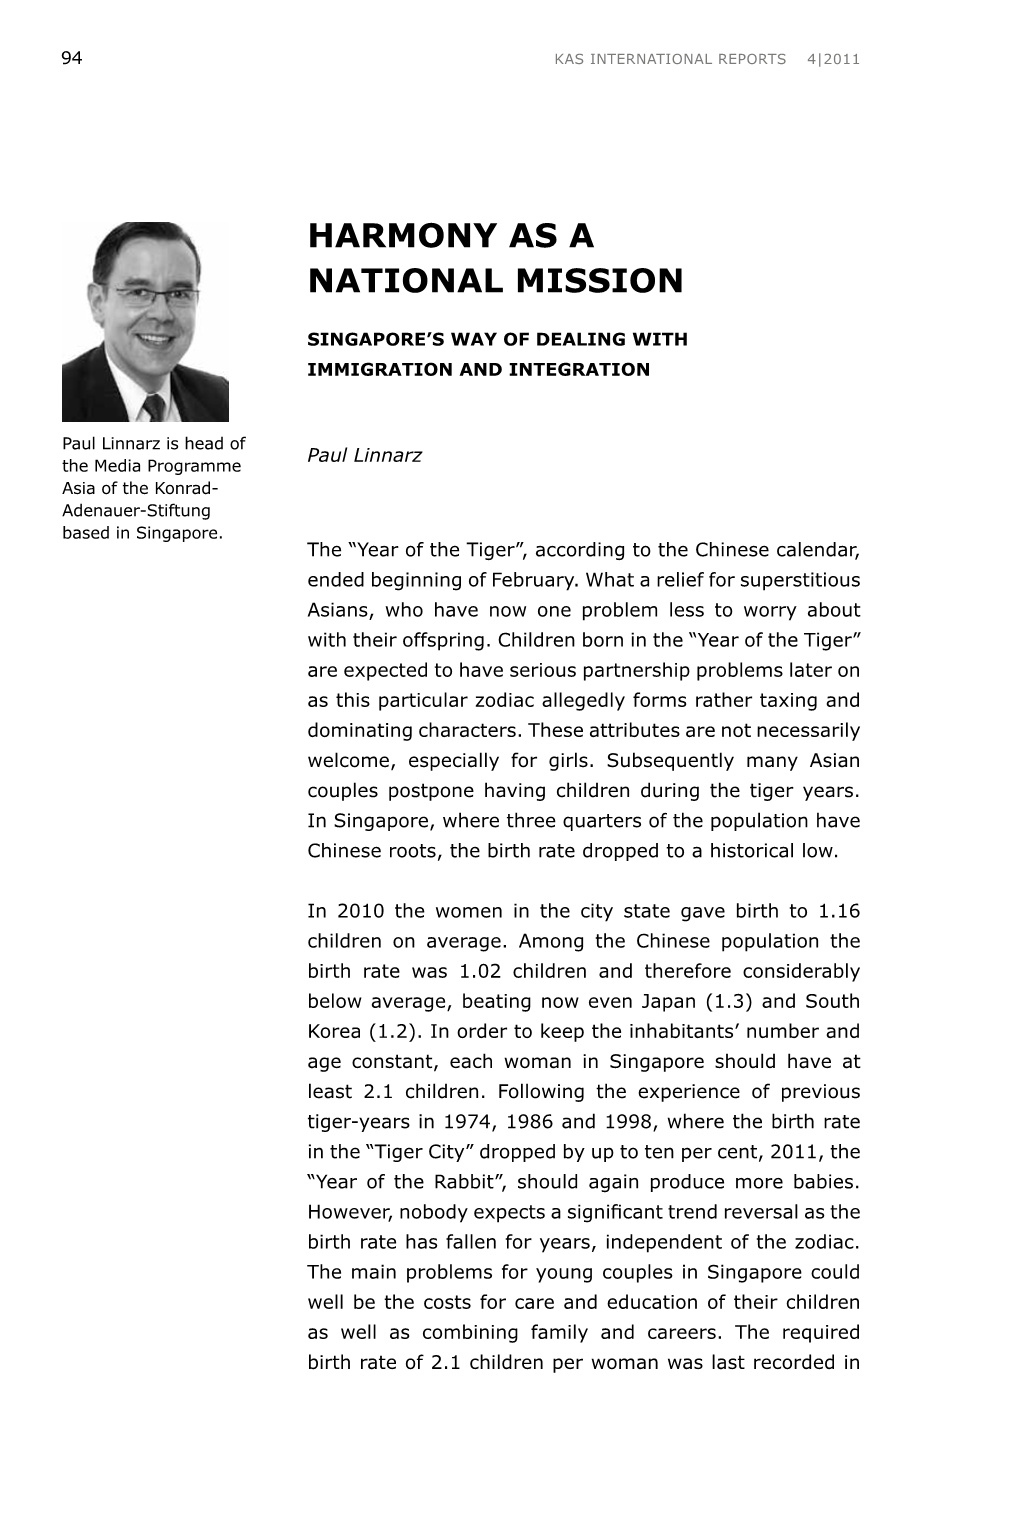 Harmony As a National Mission